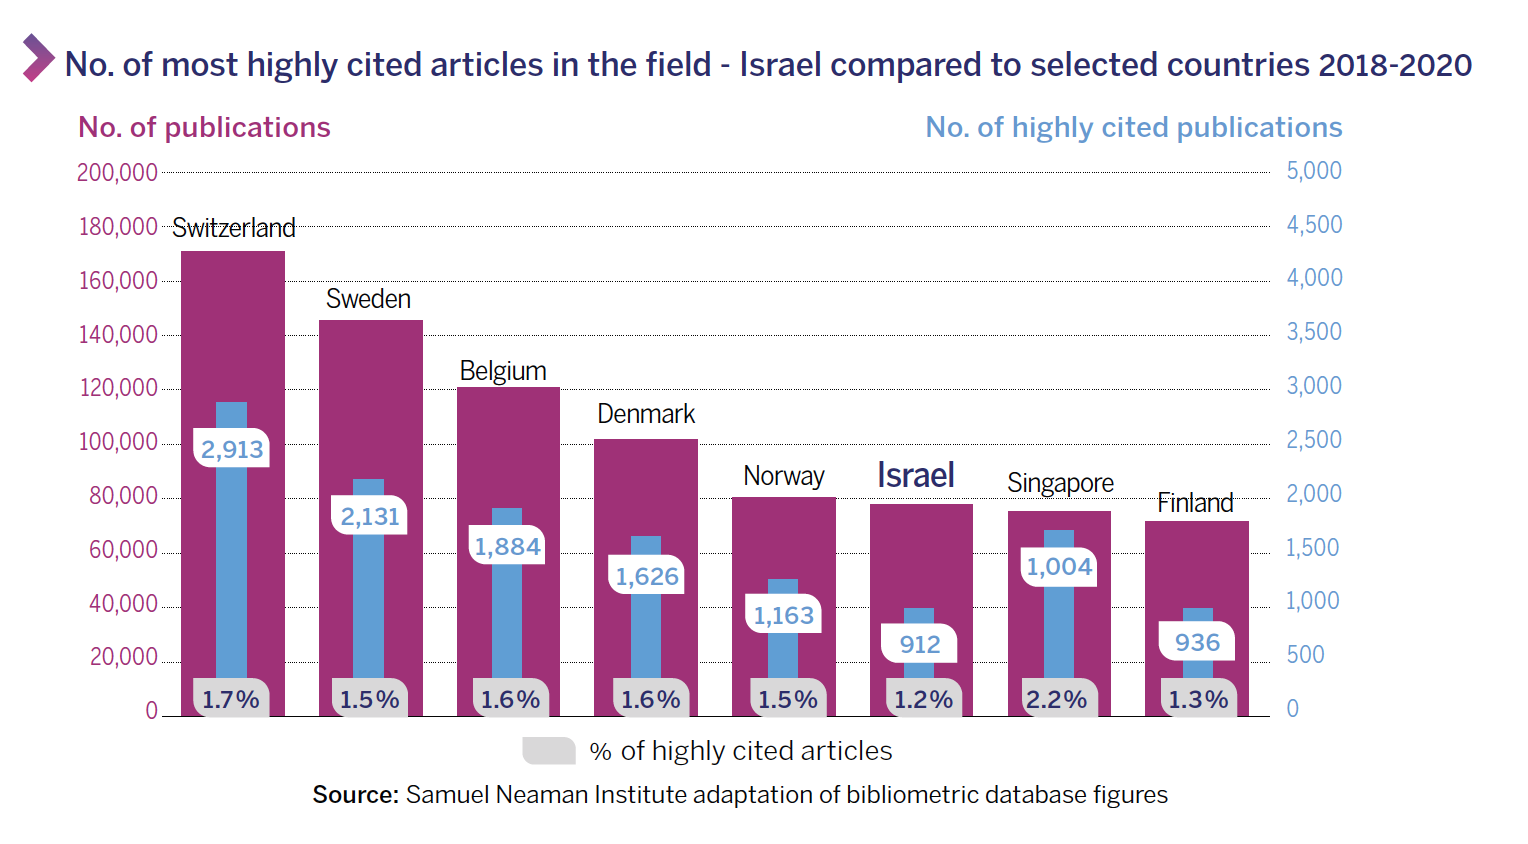 No. of most highly cited articles in the field - Israel compared to selected countries 2018-2020